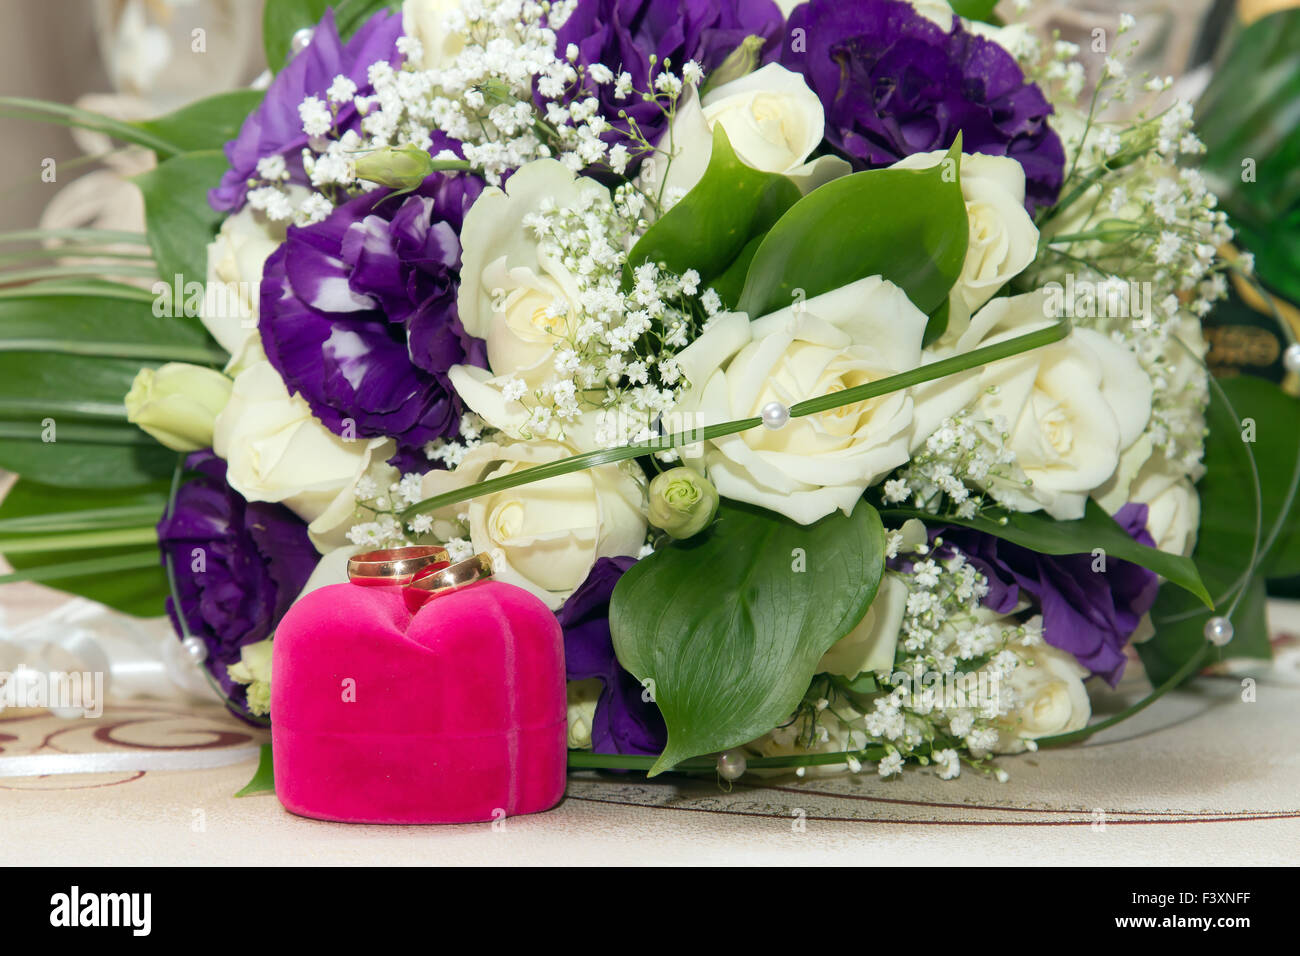 Wedding rings and flowers Stock Photo